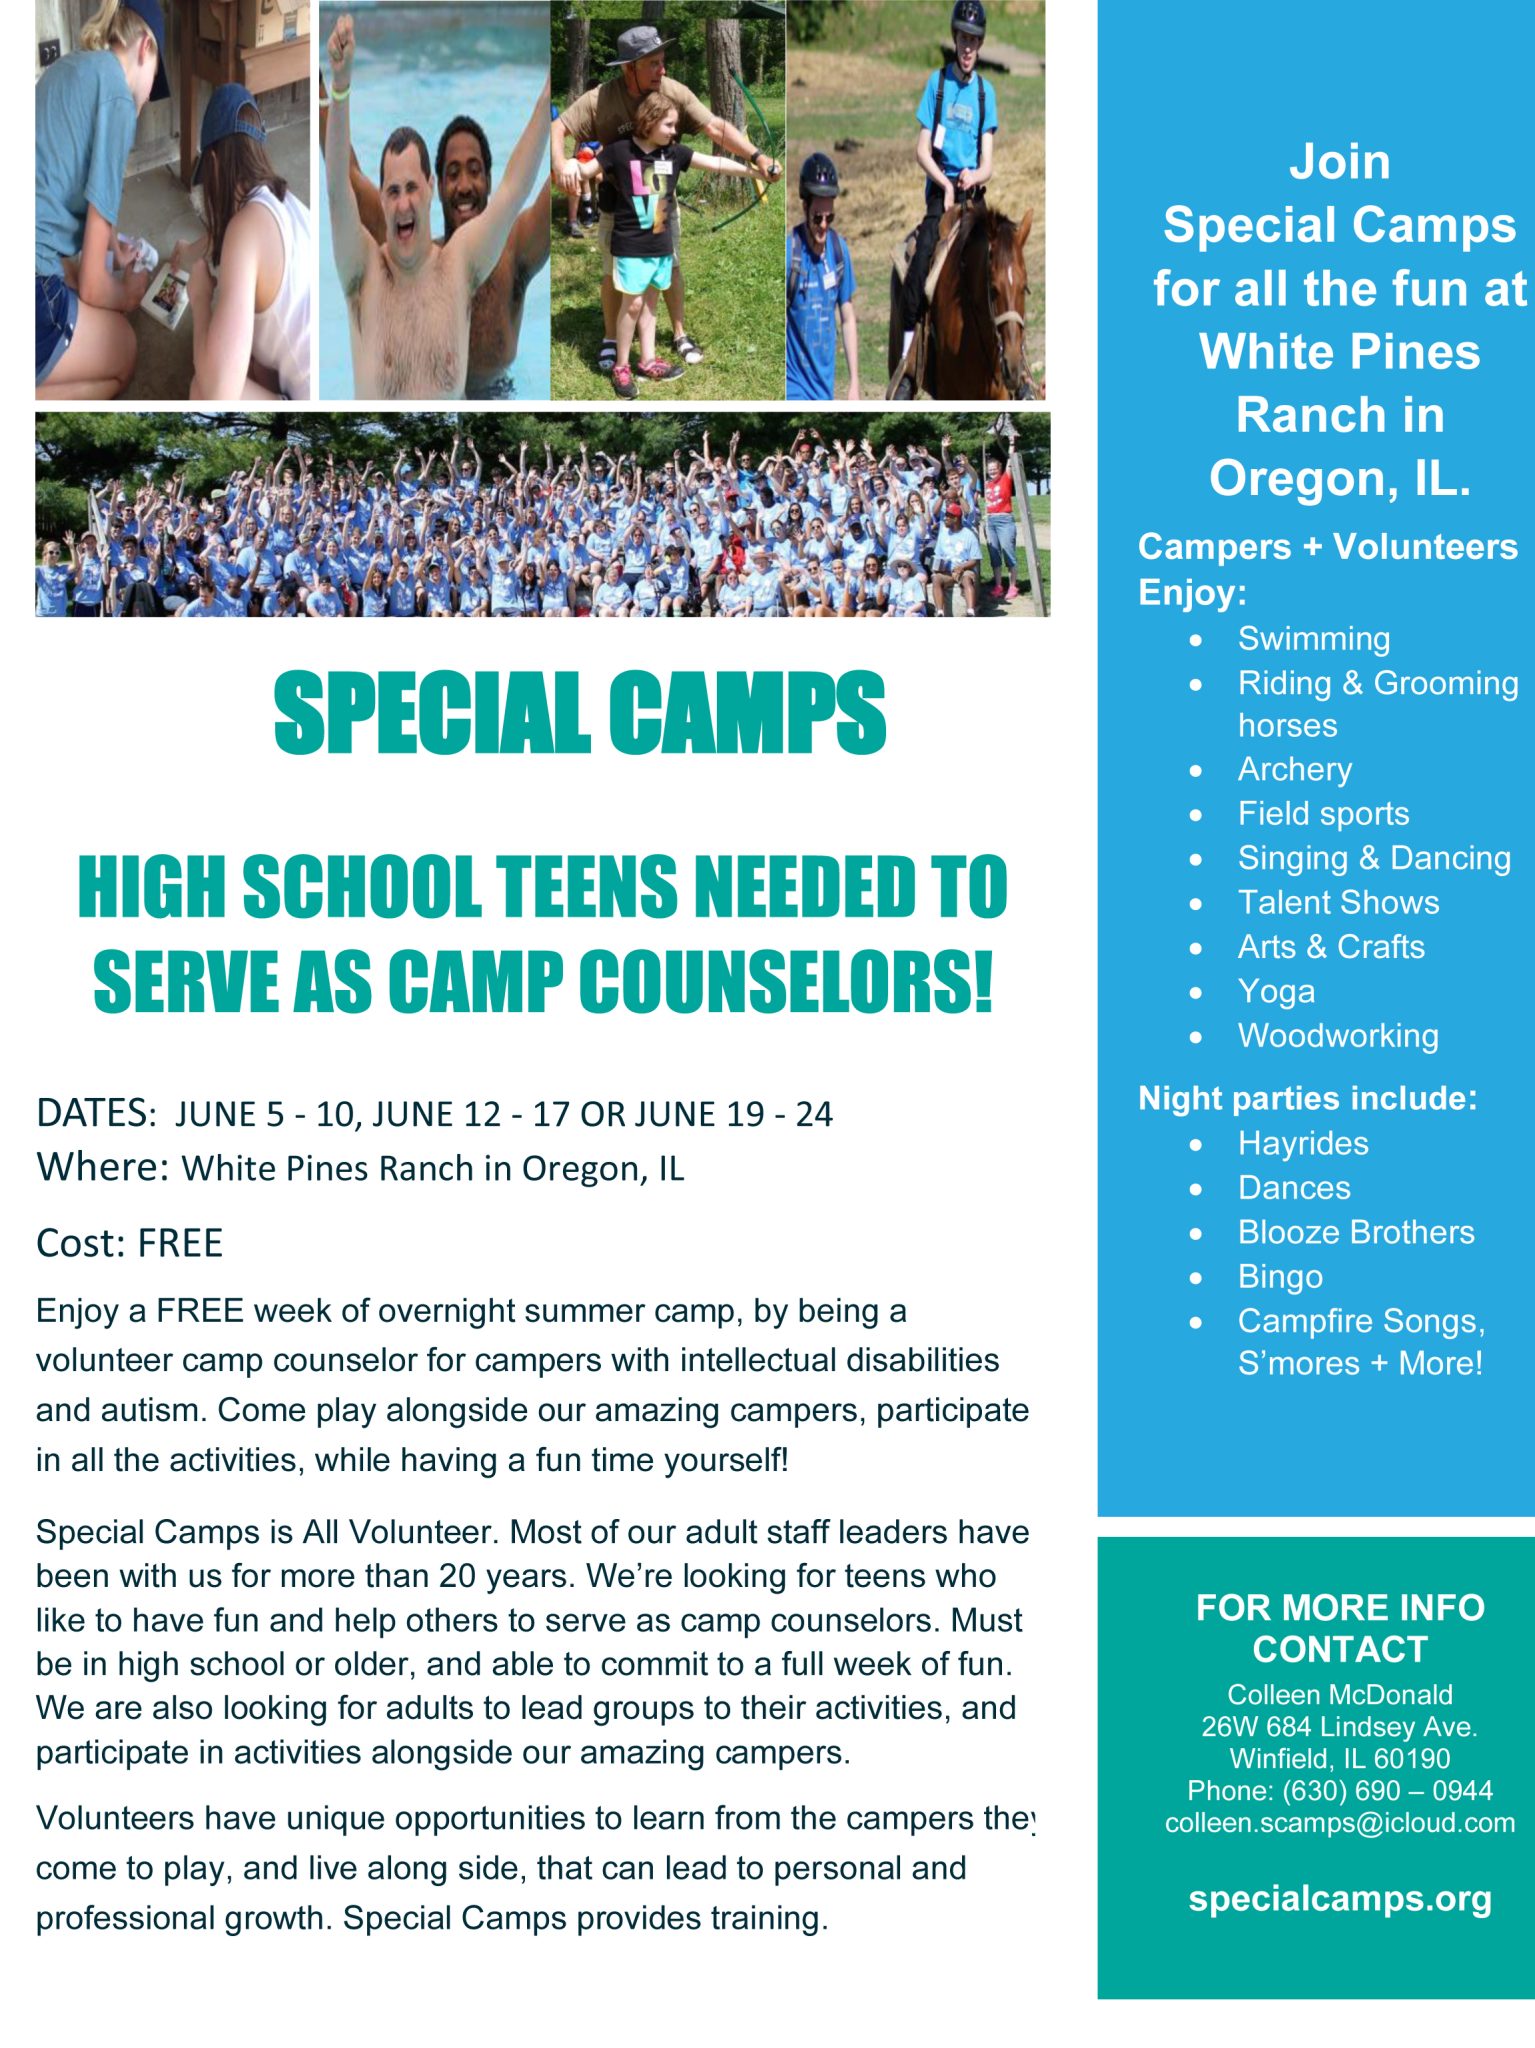 WE NEED YOU!  VOLUNTEER FOR SPECIAL CAMPS!